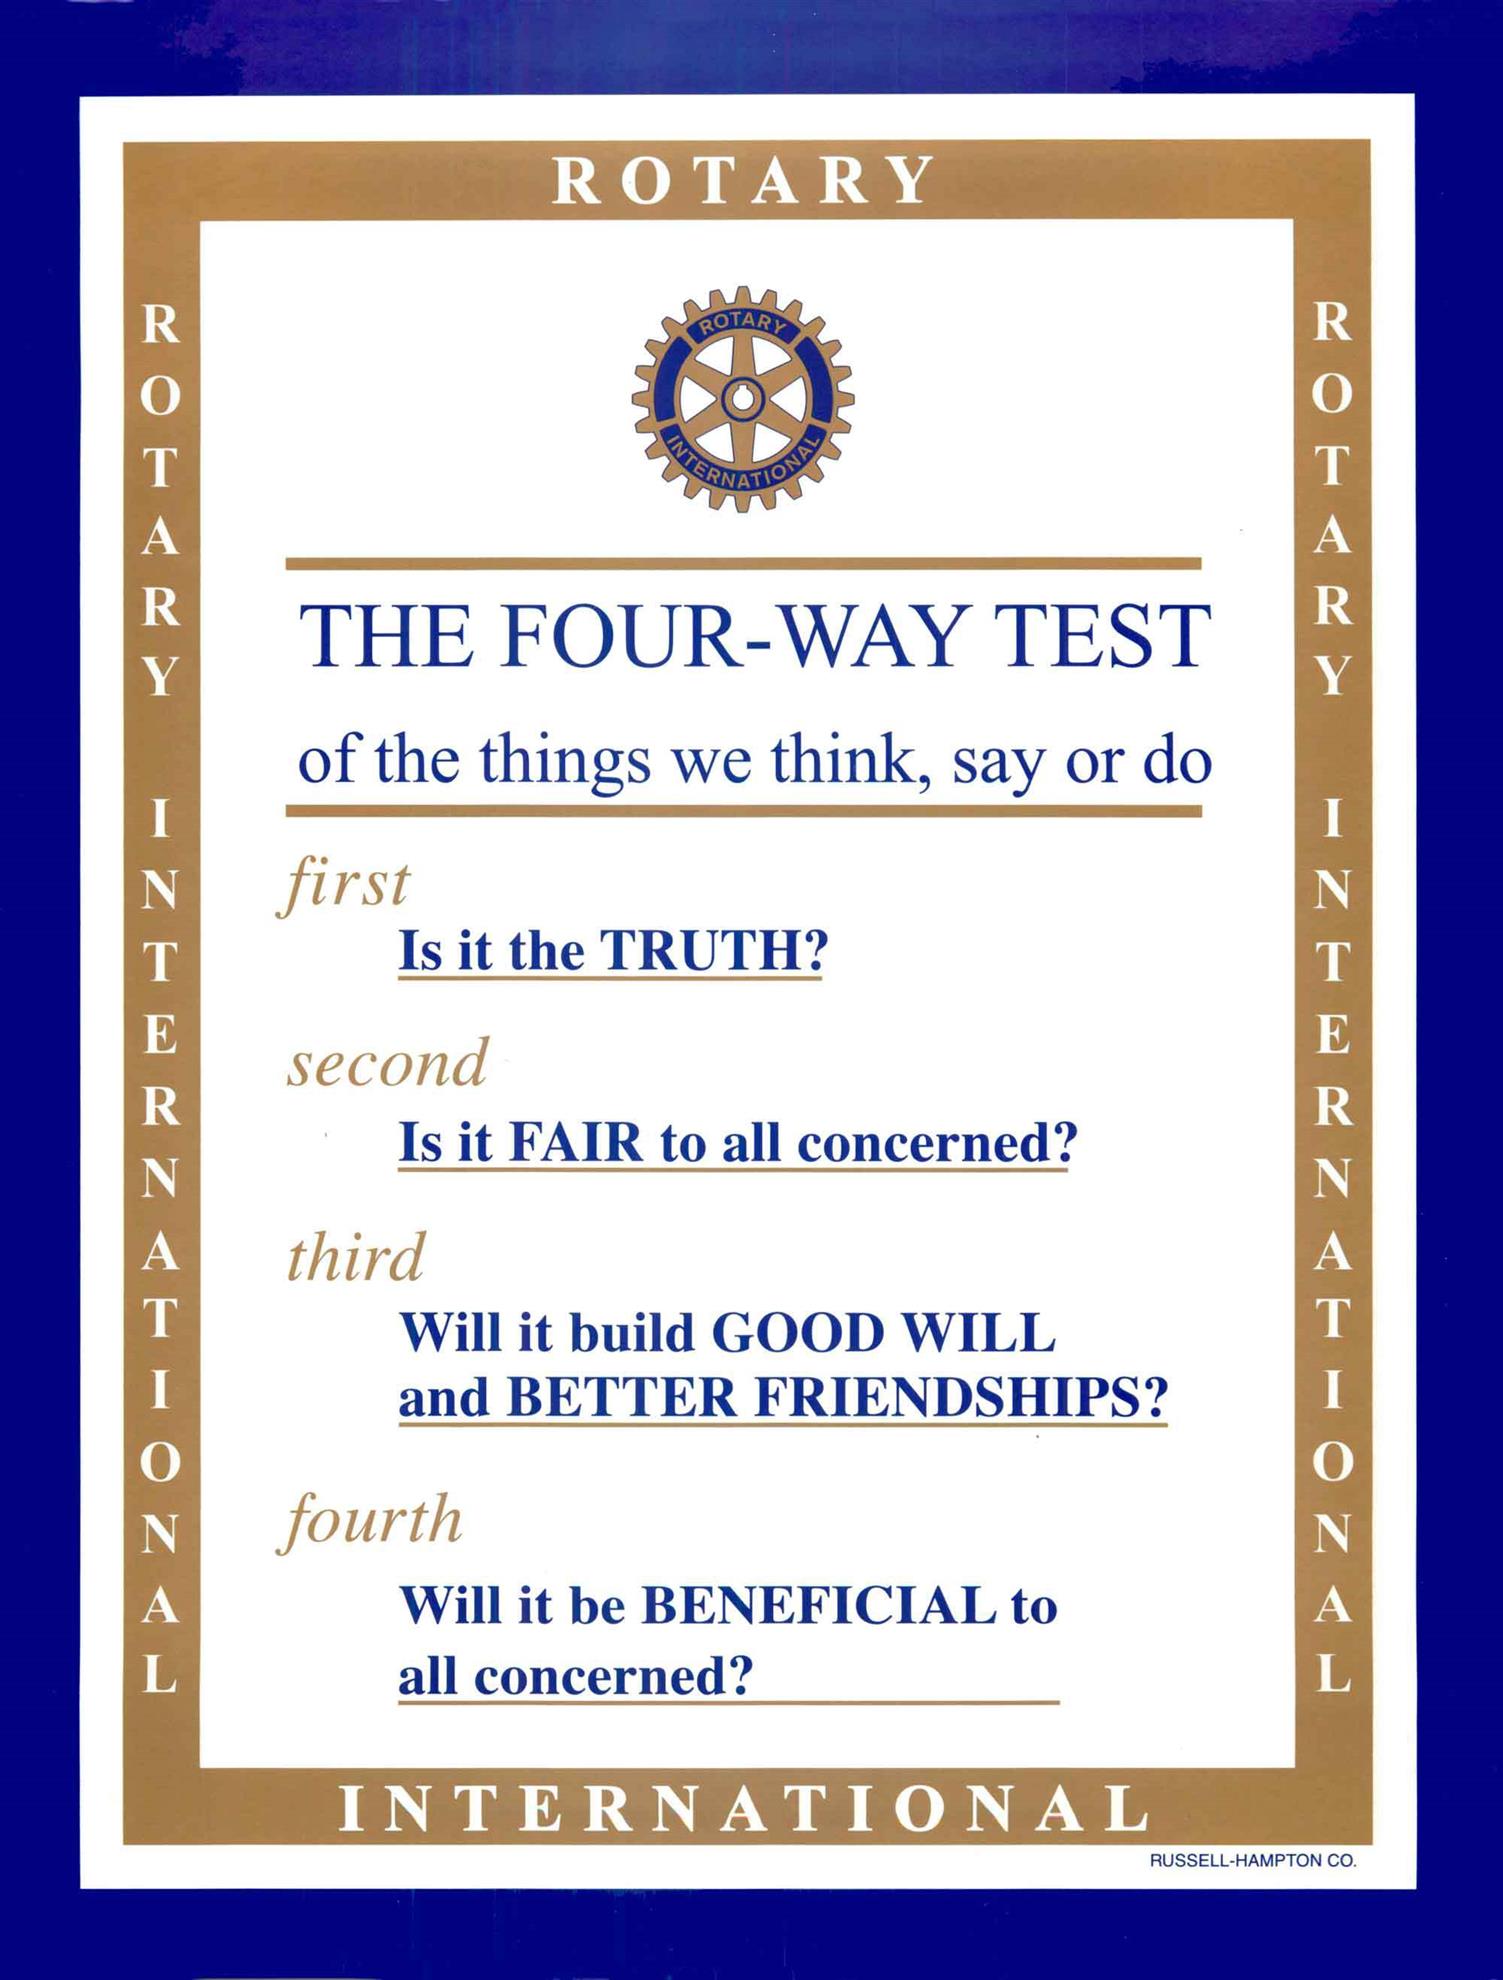 rotary 4 way test essay examples